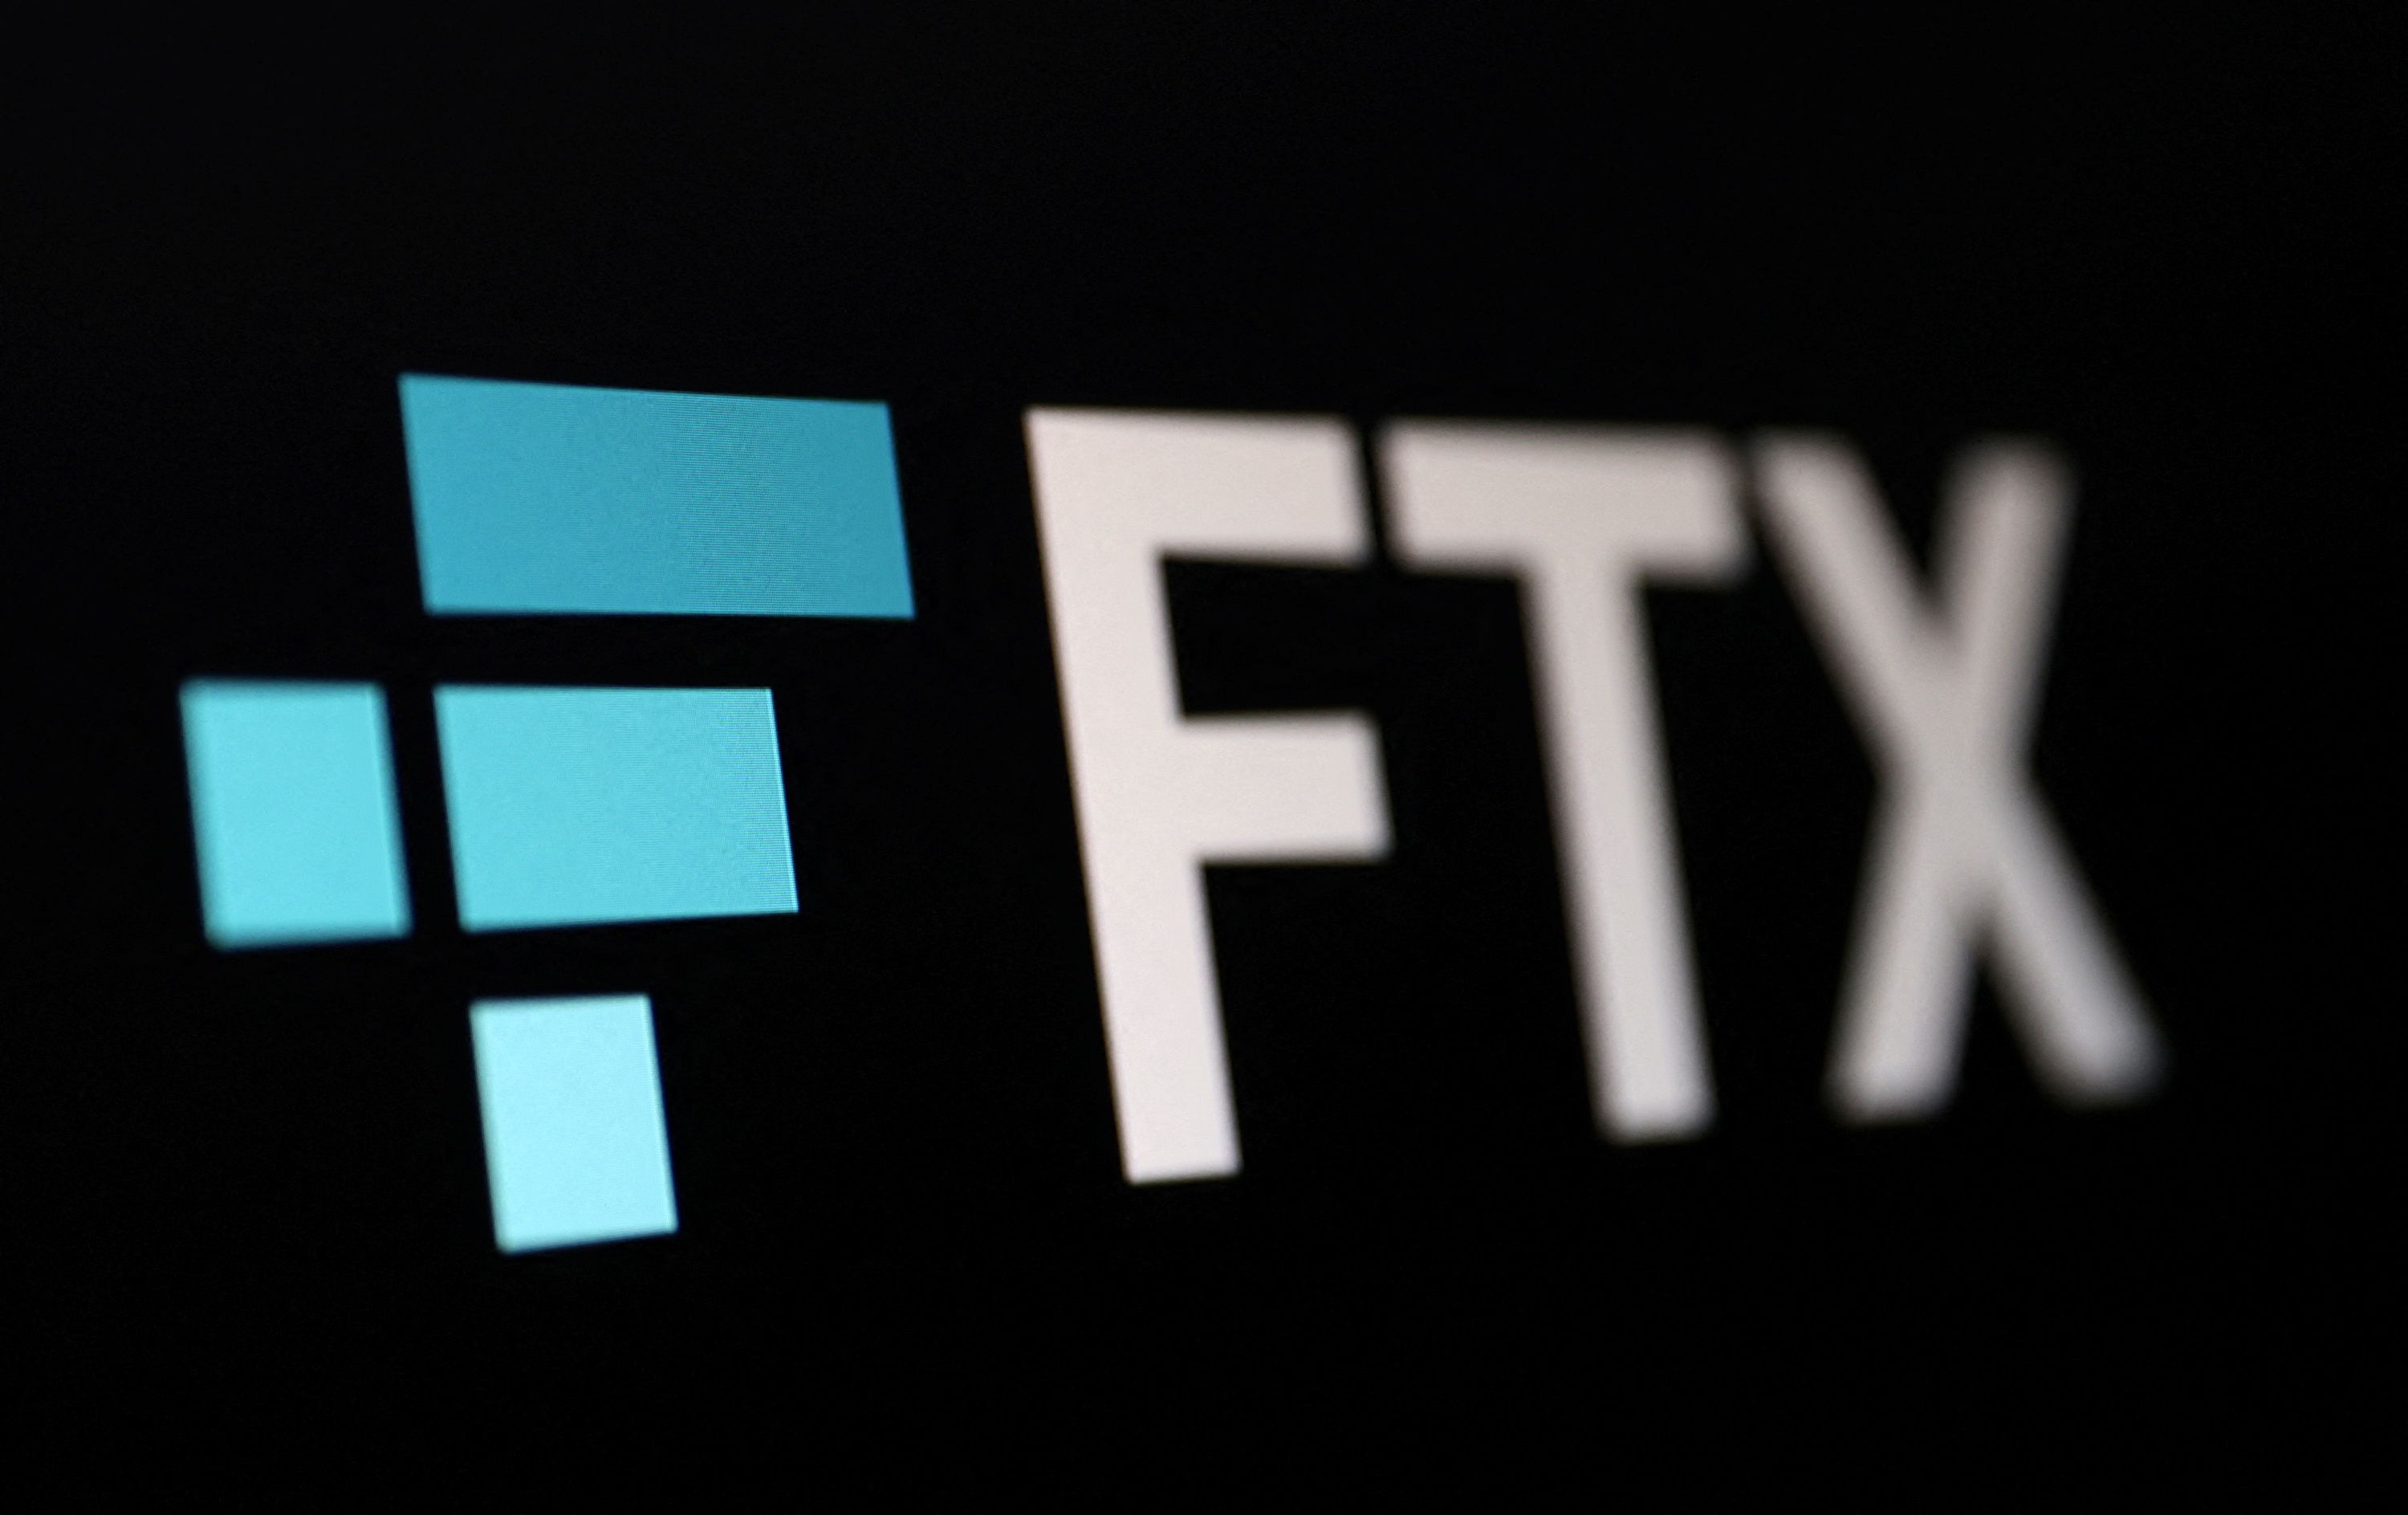 FTX investigates ‘unauthorized transactions’ after millions go missing from crypto wallets